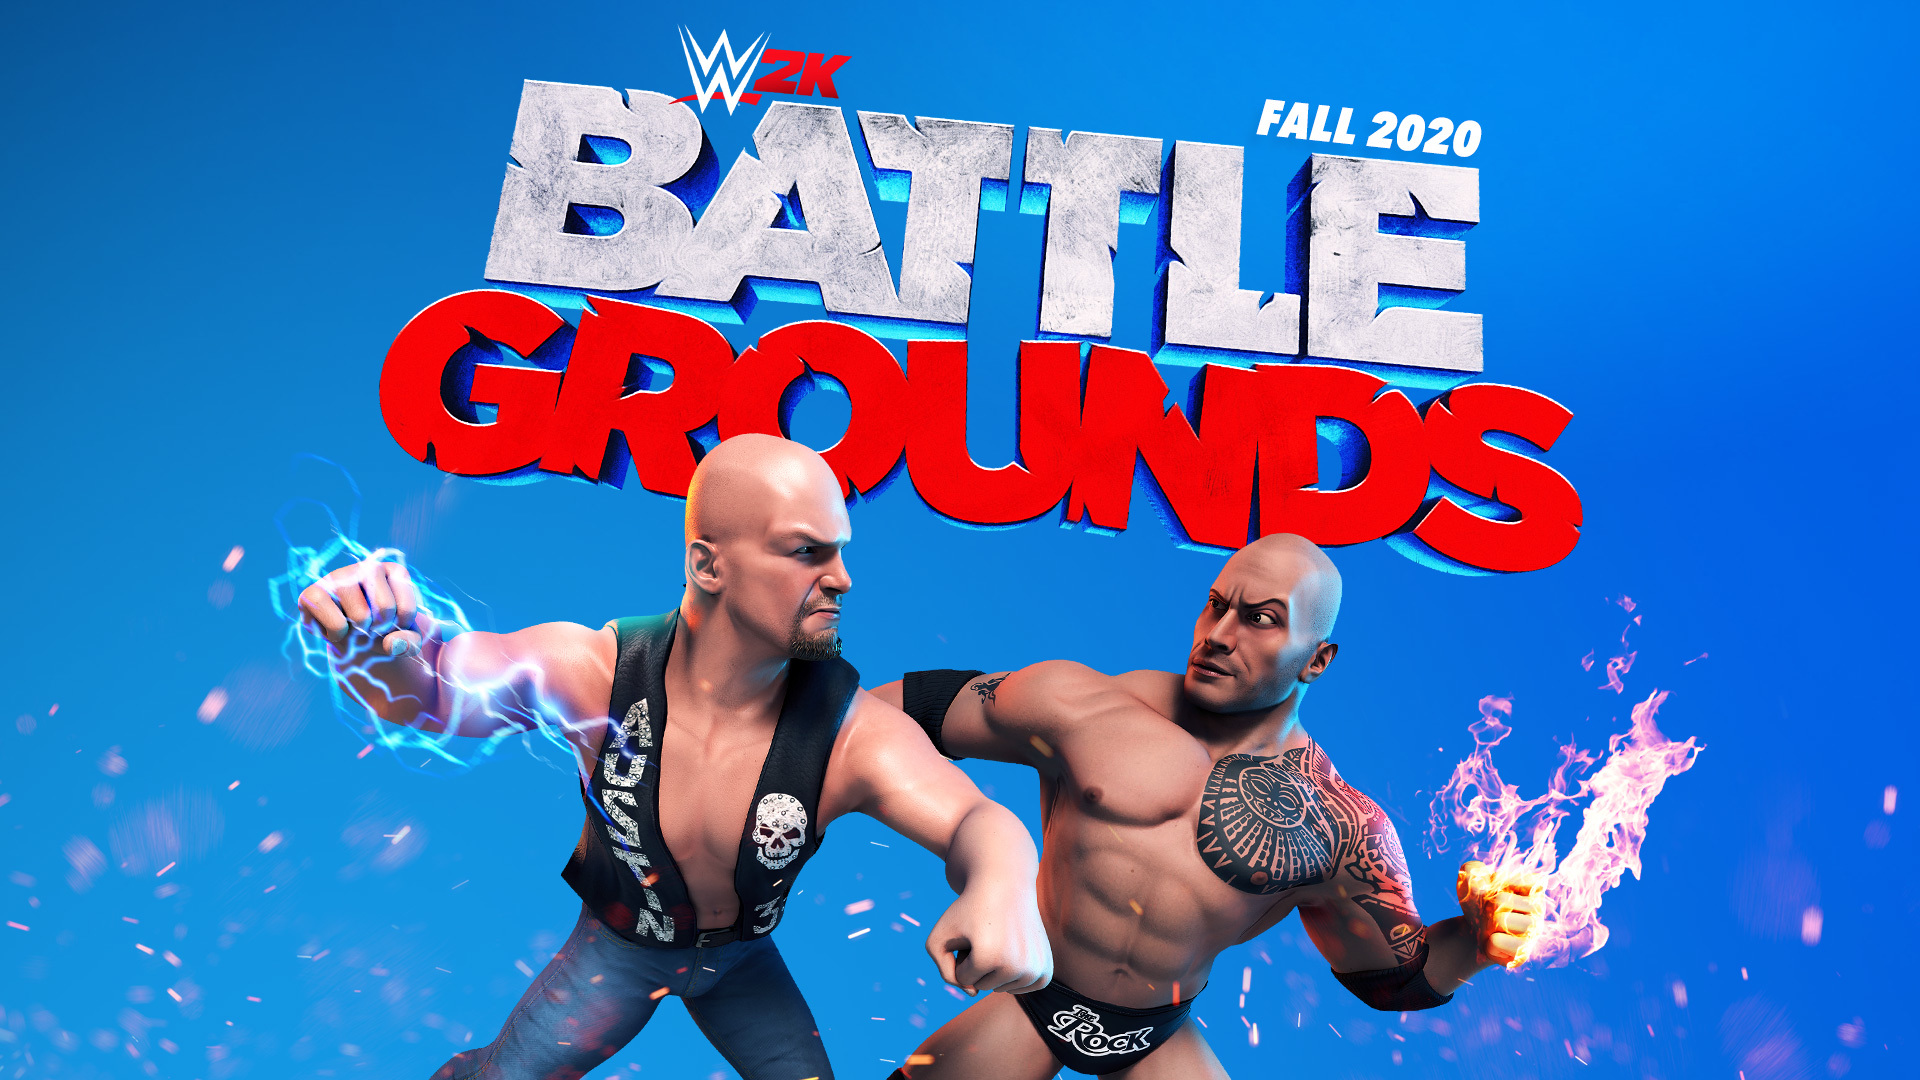 Latest WWE 2K Battlegrounds Update Adds New Wrestlers, Arenas, And More